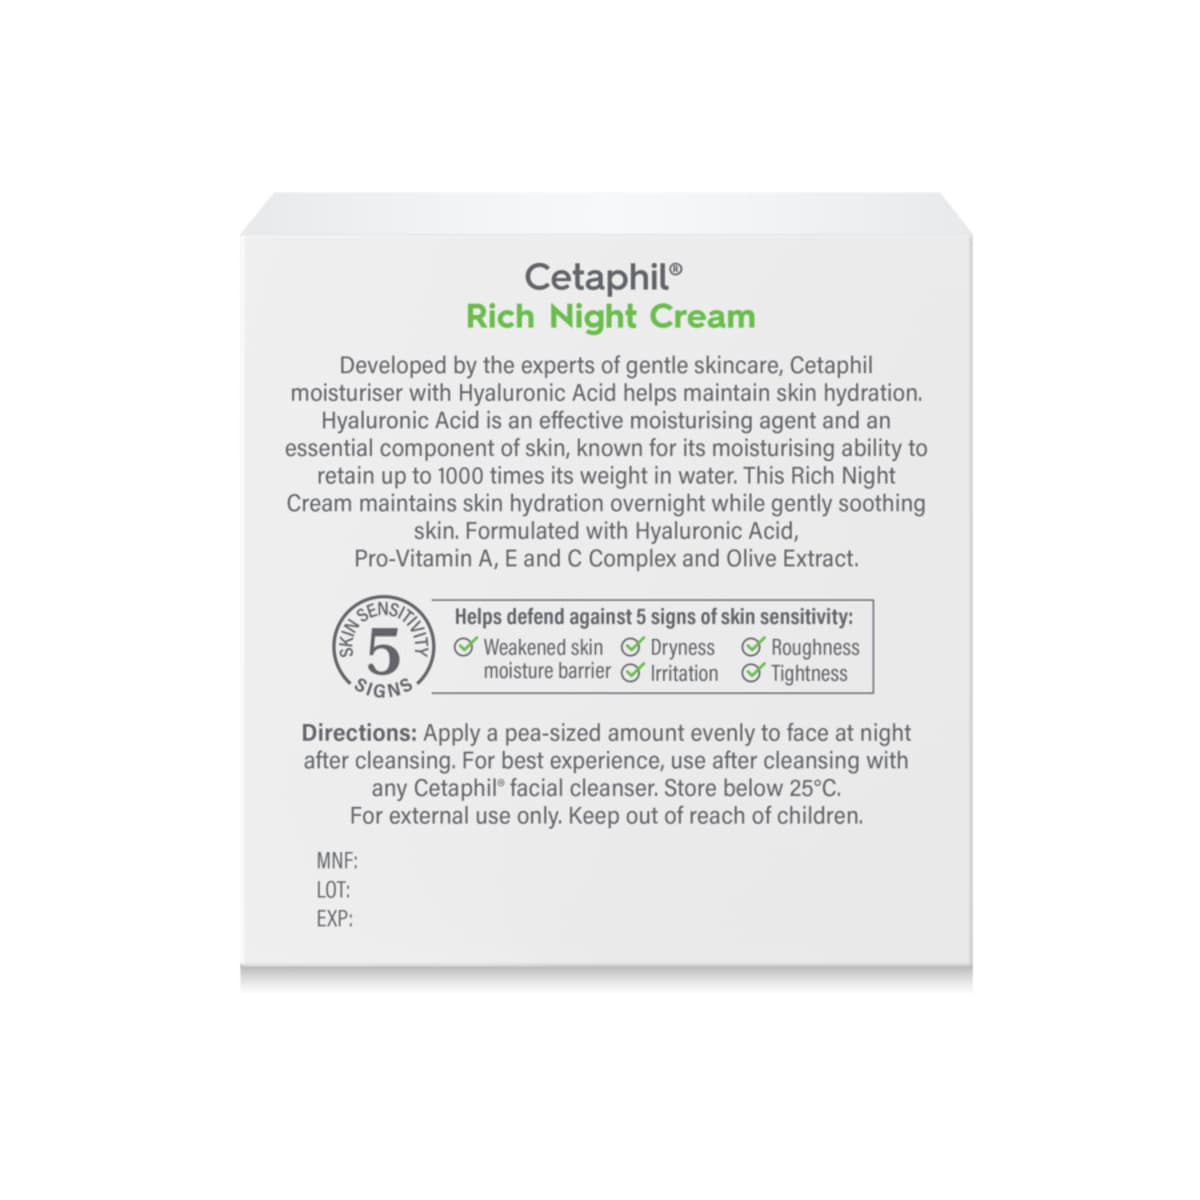 Cetaphil Rich Night Cream with Hyaluronic Acid 48g